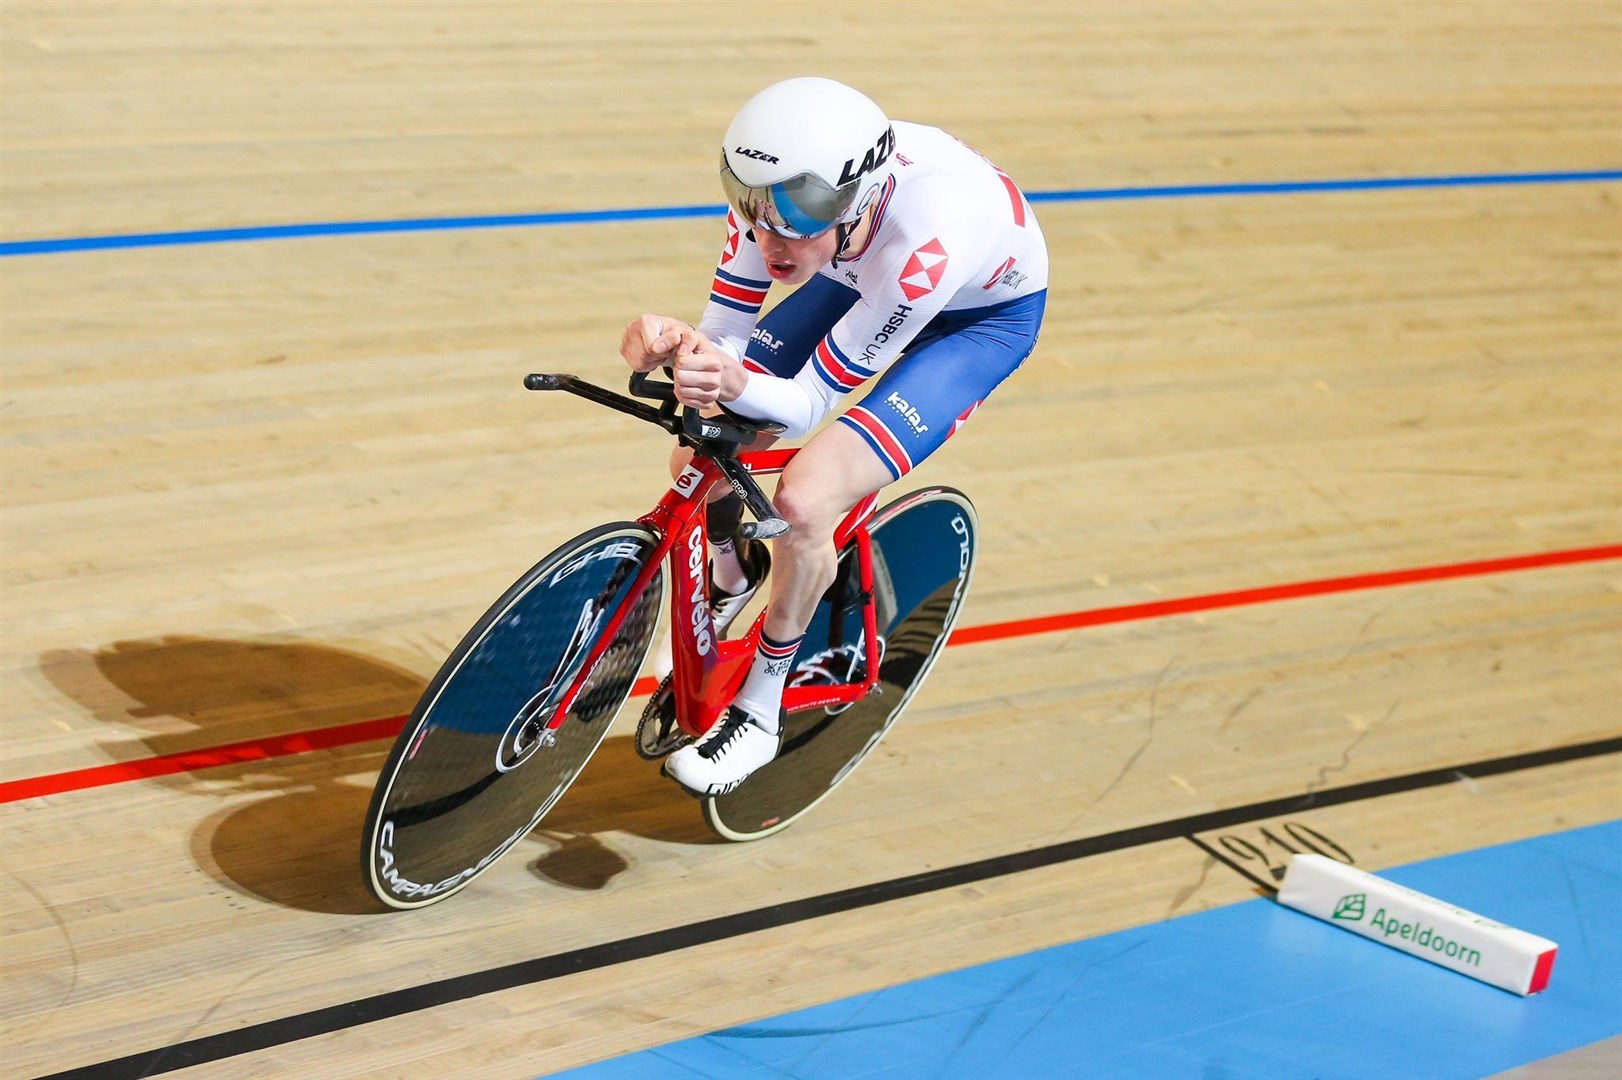 Fin Graham says he learned from his performances at the Track World Championships.